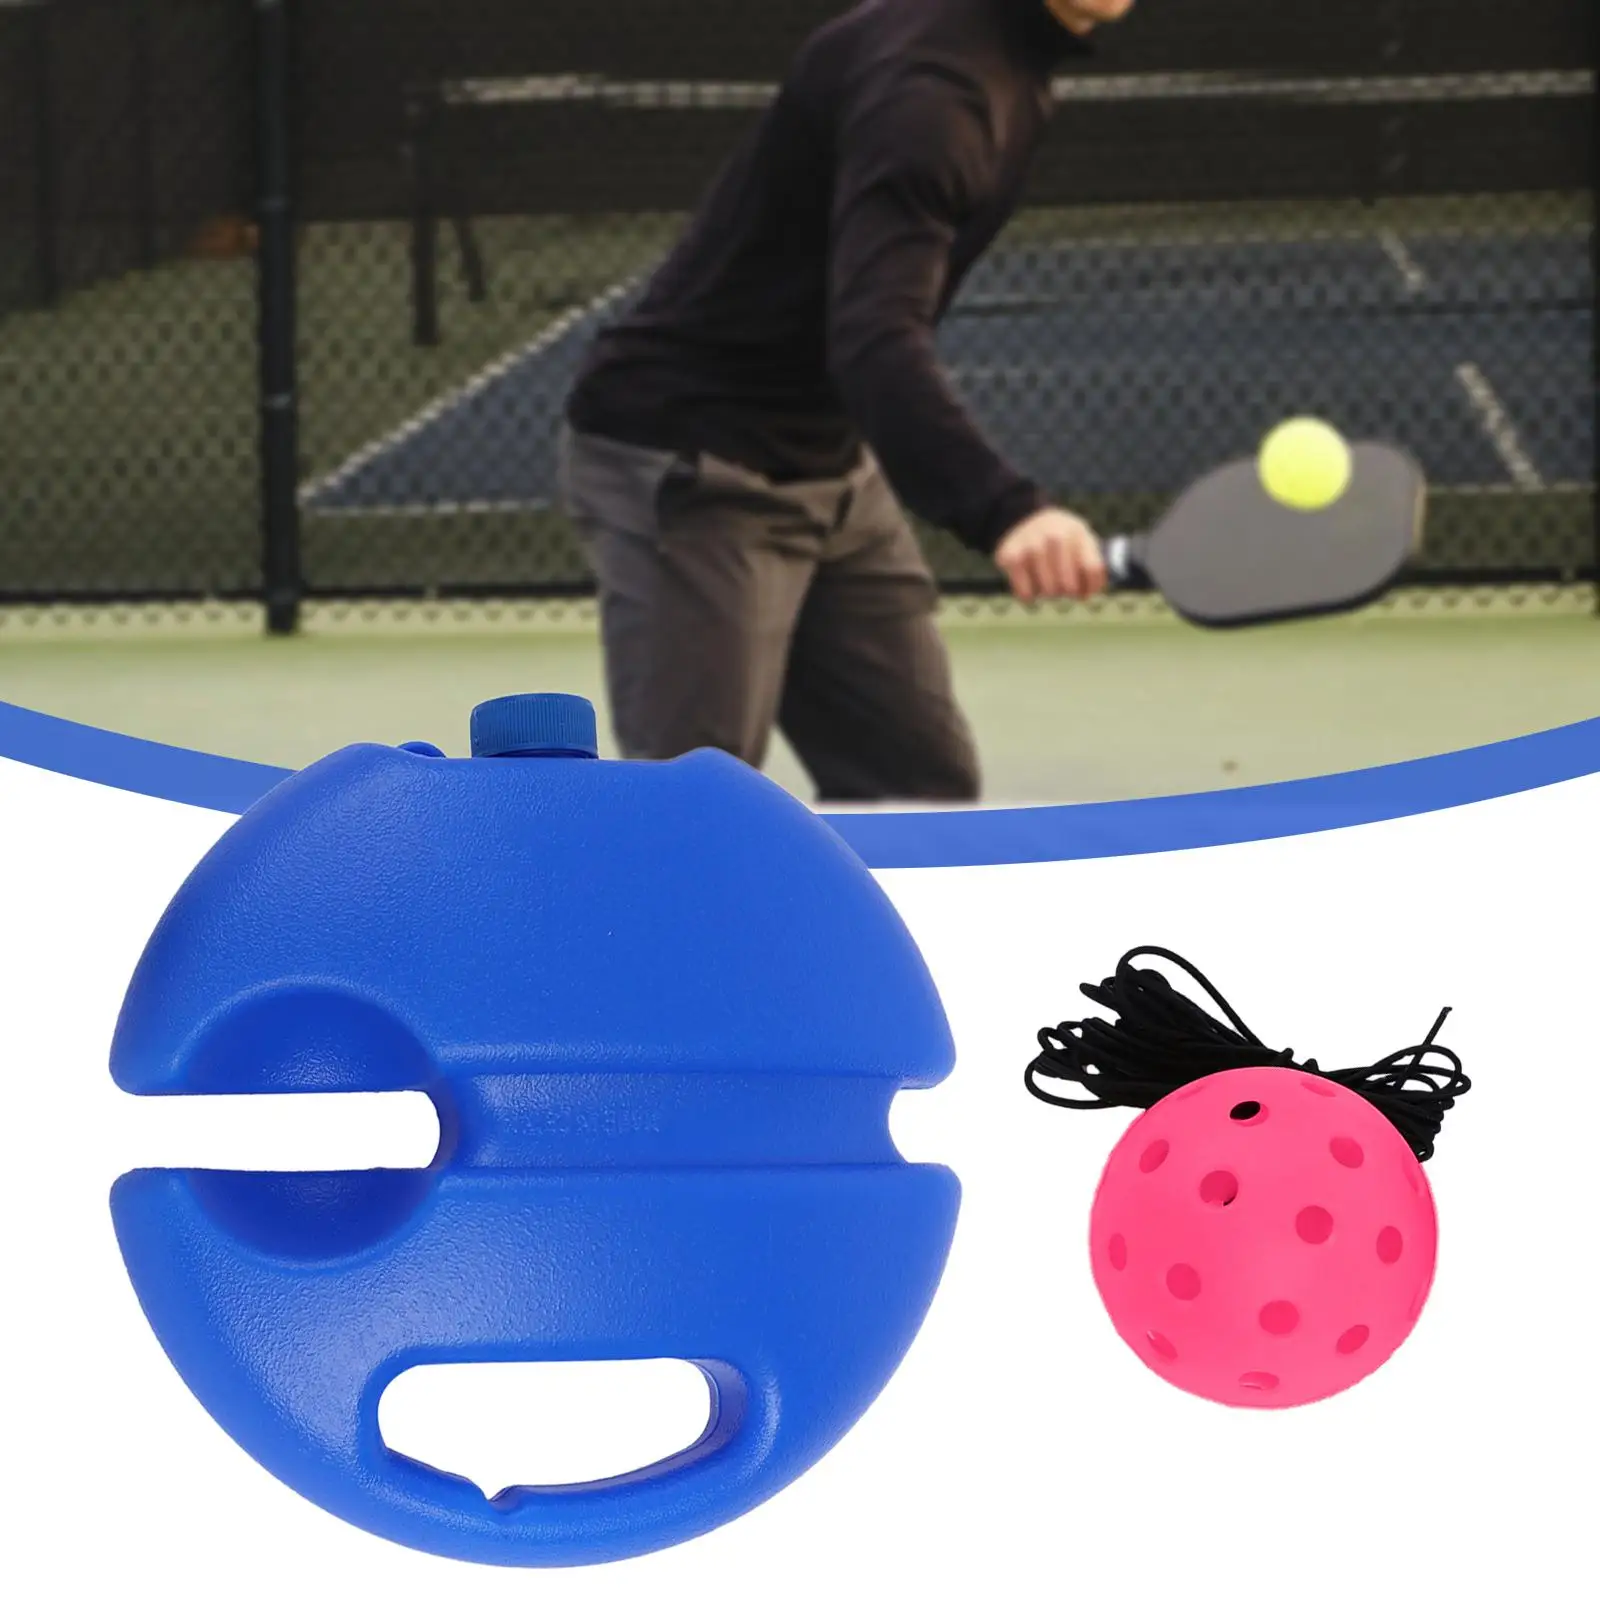 Pickleball Trainer Pickleball Ball with Cord Portable with Handle Exerciser Pickleball Training Aid for Training Sport Player